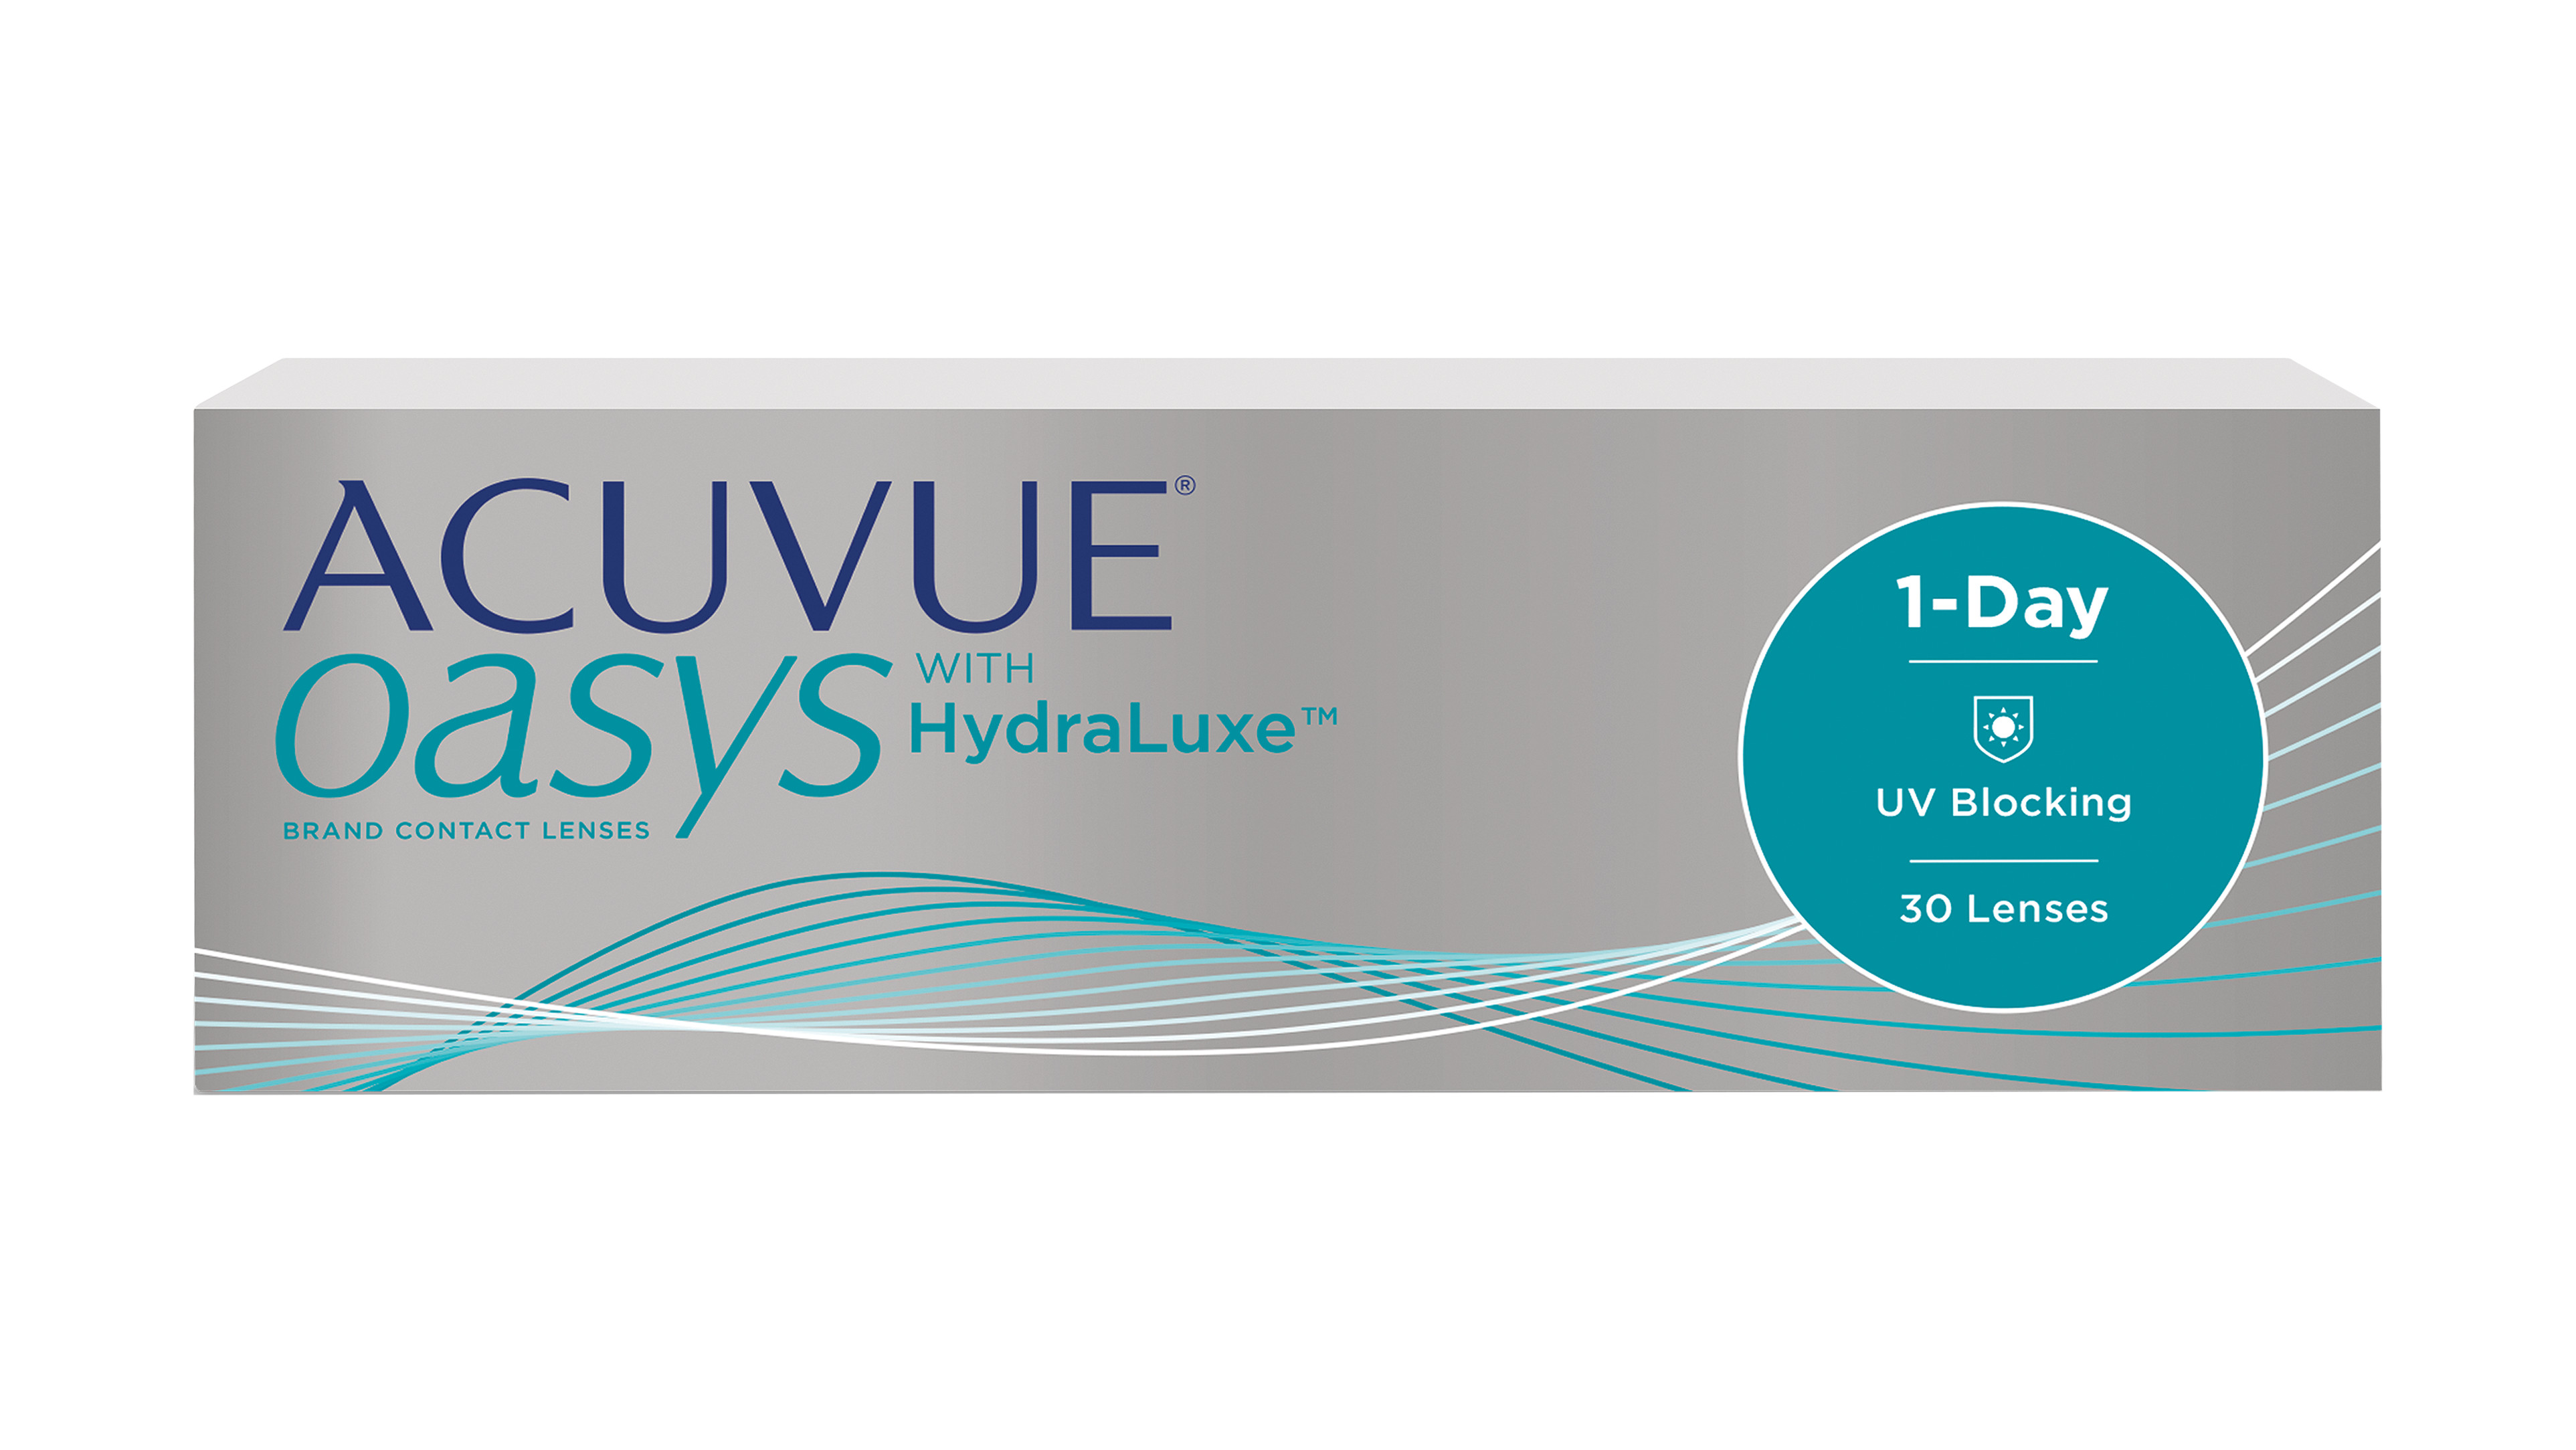 Front ACUVUE® ACUVUE OASYS® 1-DAY Tageslinsen Tageslinsen 30 Linsen pro Packung, pro Auge